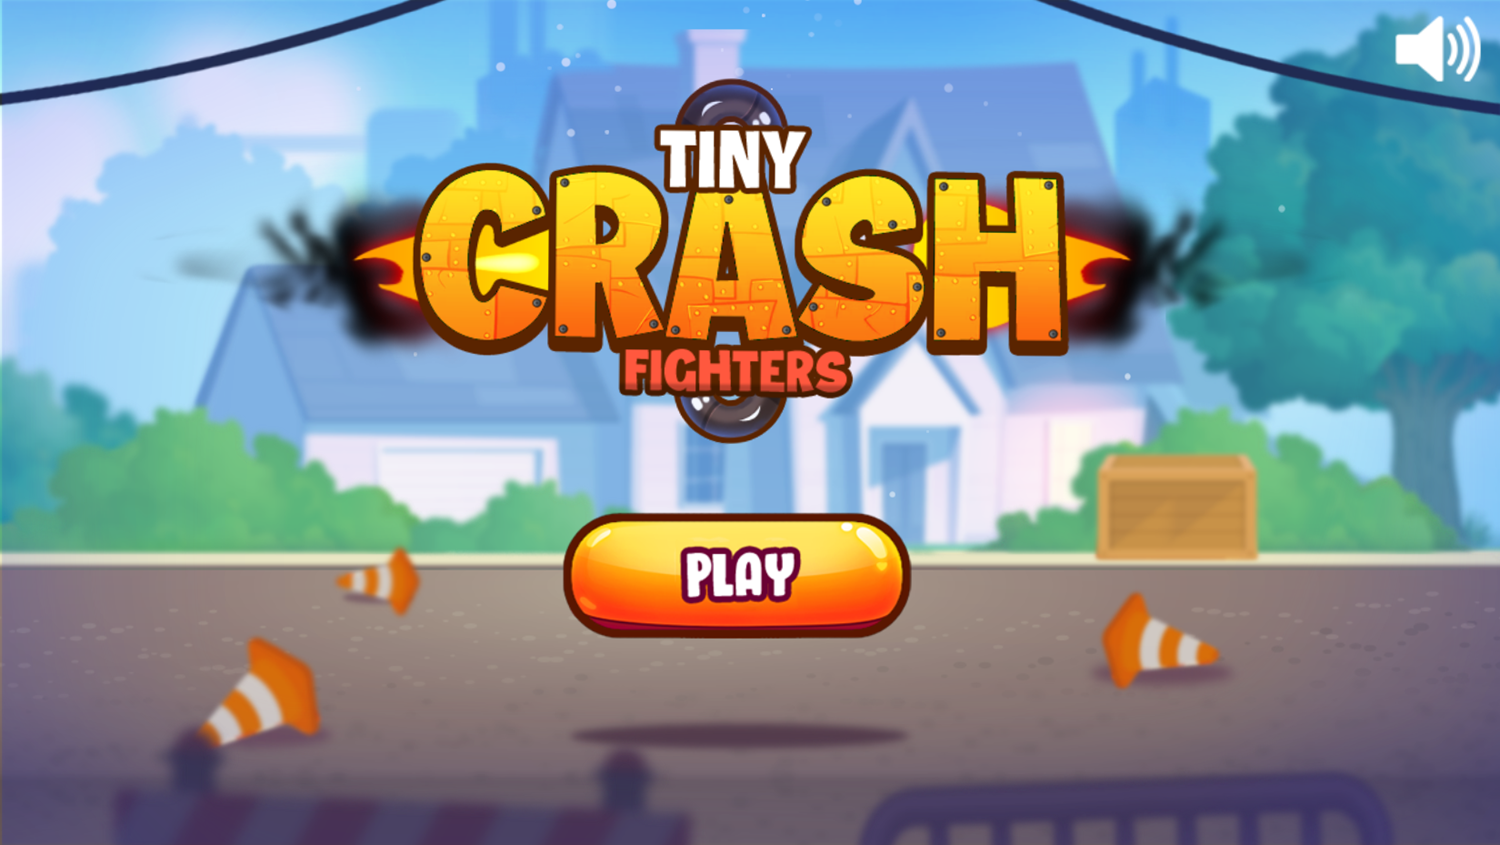 Tiny Crash Fighters Game Welcome Screen Screenshot.